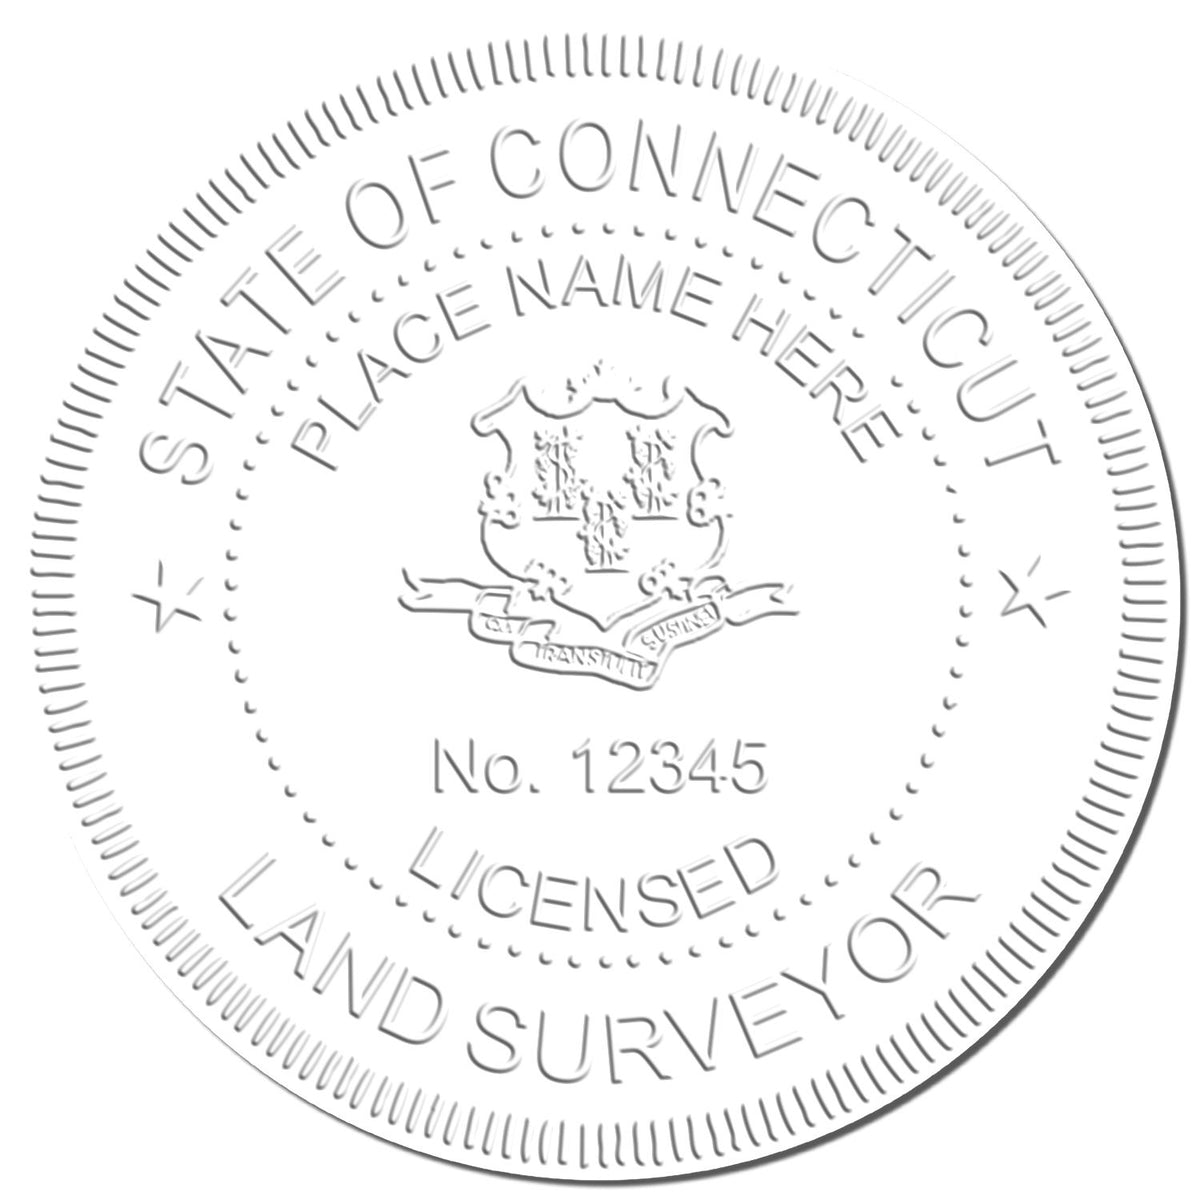 This paper is stamped with a sample imprint of the State of Connecticut Soft Land Surveyor Embossing Seal, signifying its quality and reliability.